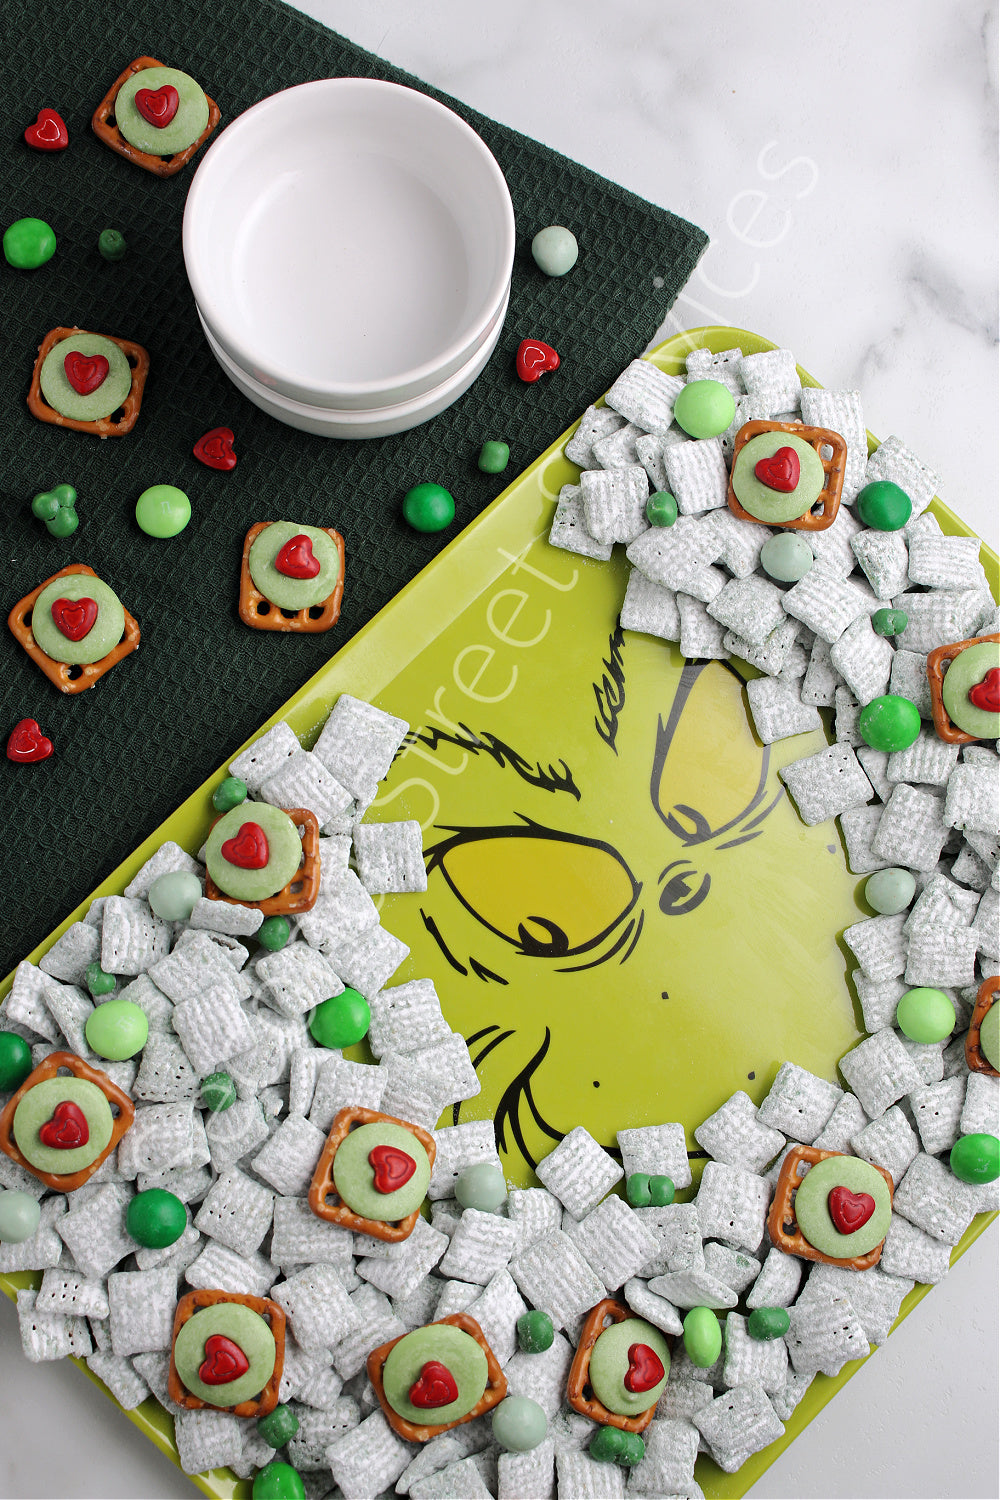 Grinch Snack Mix - Set 1 of 4